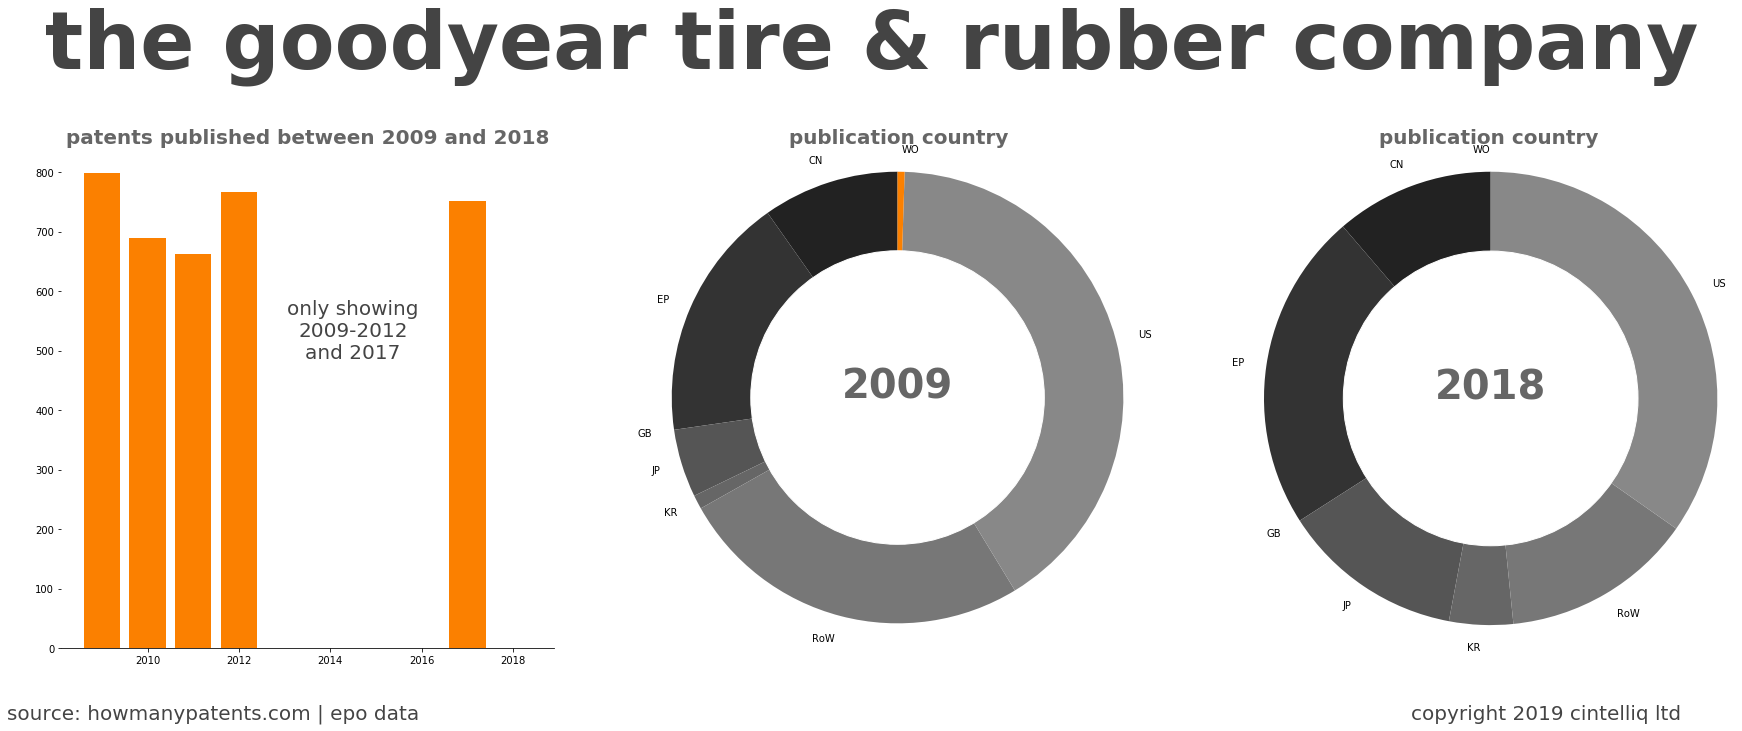 summary of patents for The Goodyear Tire & Rubber Company